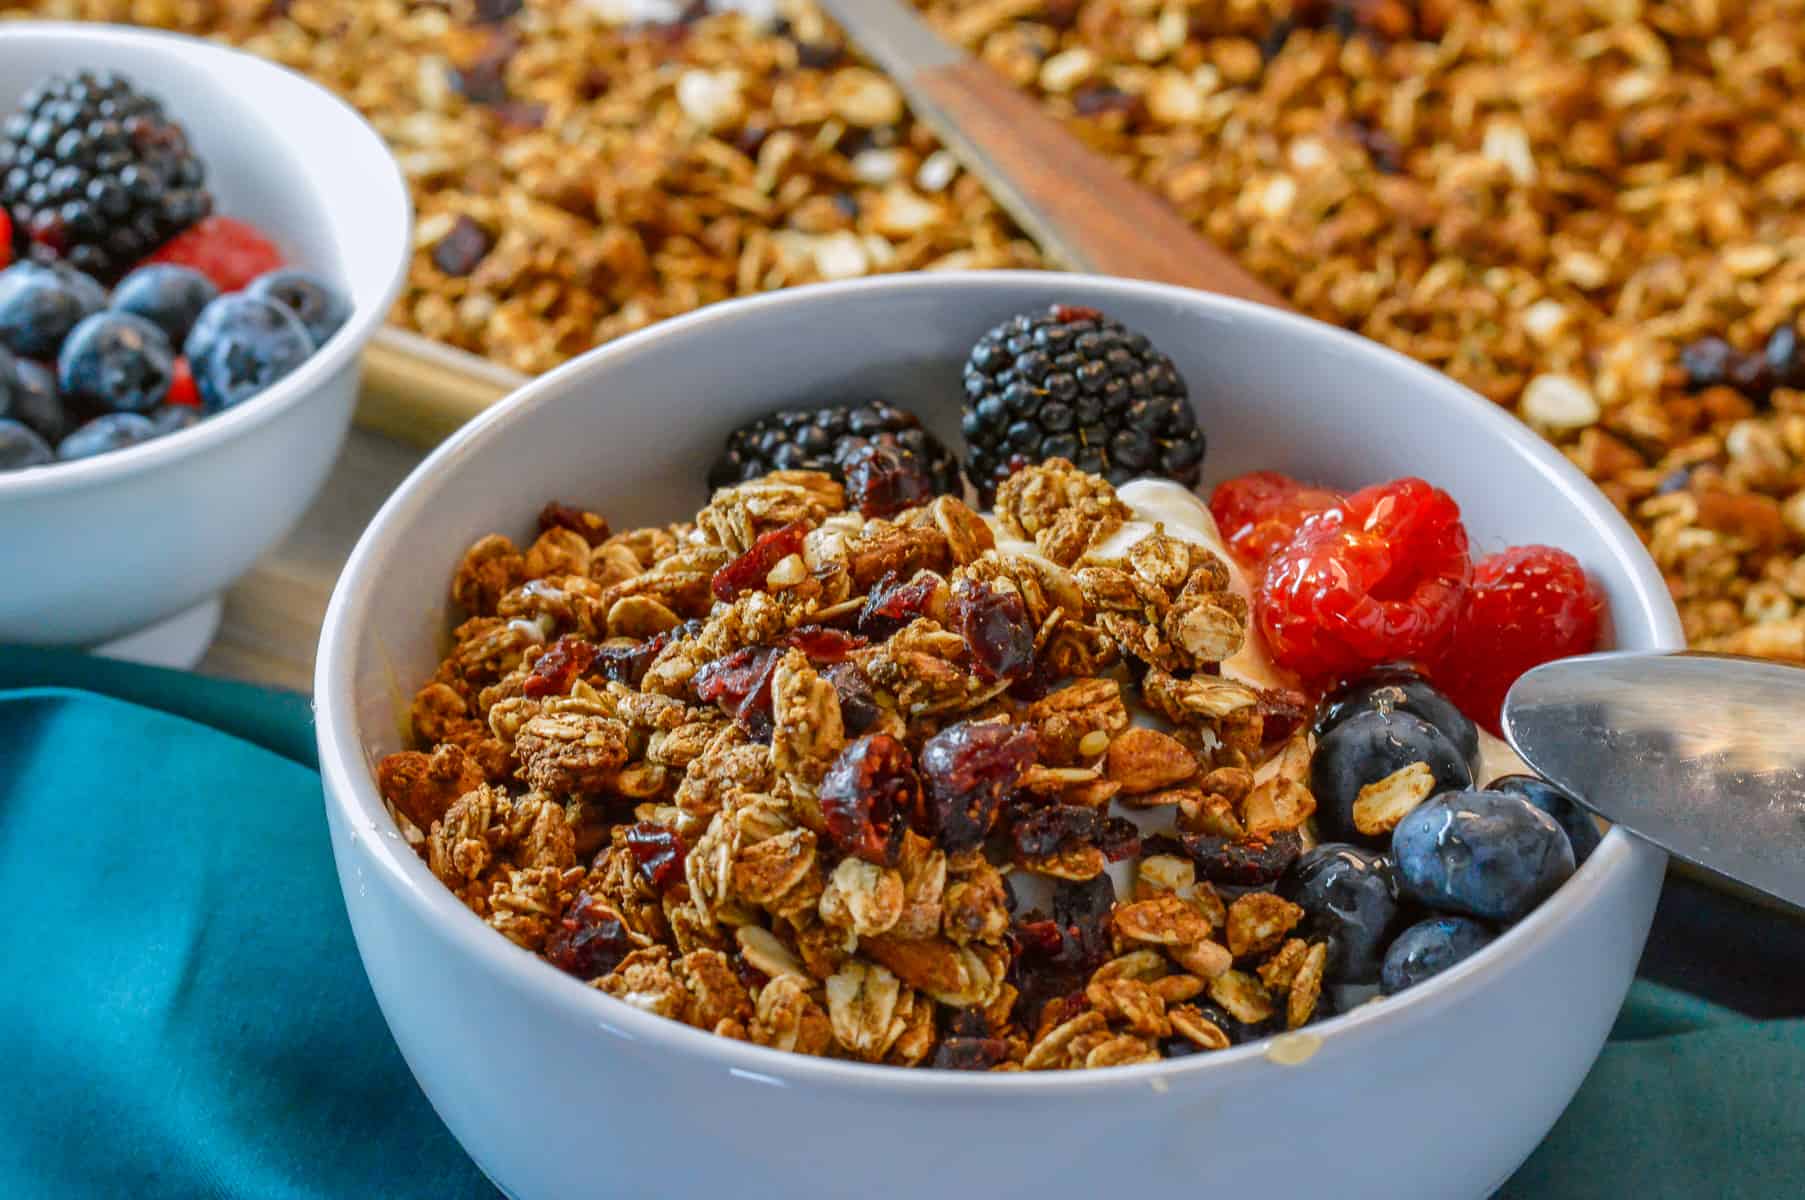 bowl of yogurt with granola and berries with more berries to the left and sheet pan of baked granola in background